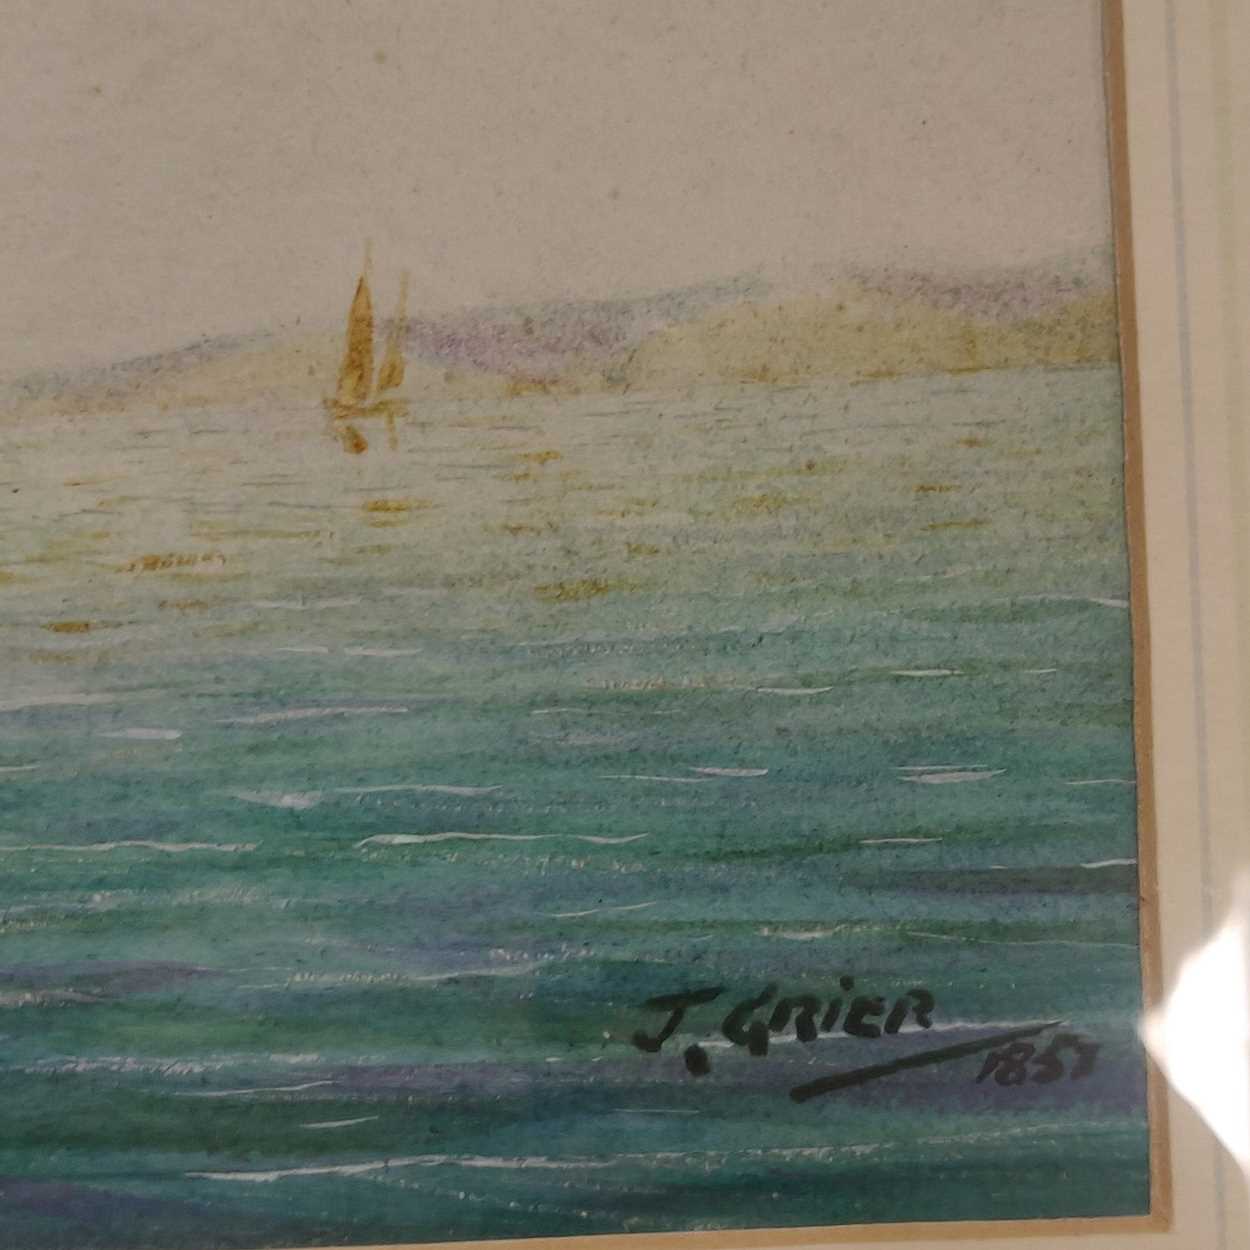 J. GrierSailing ship at sea signed and dated 'J. Grier 1857' (lower right)watercolour, pen and ink - Image 9 of 10